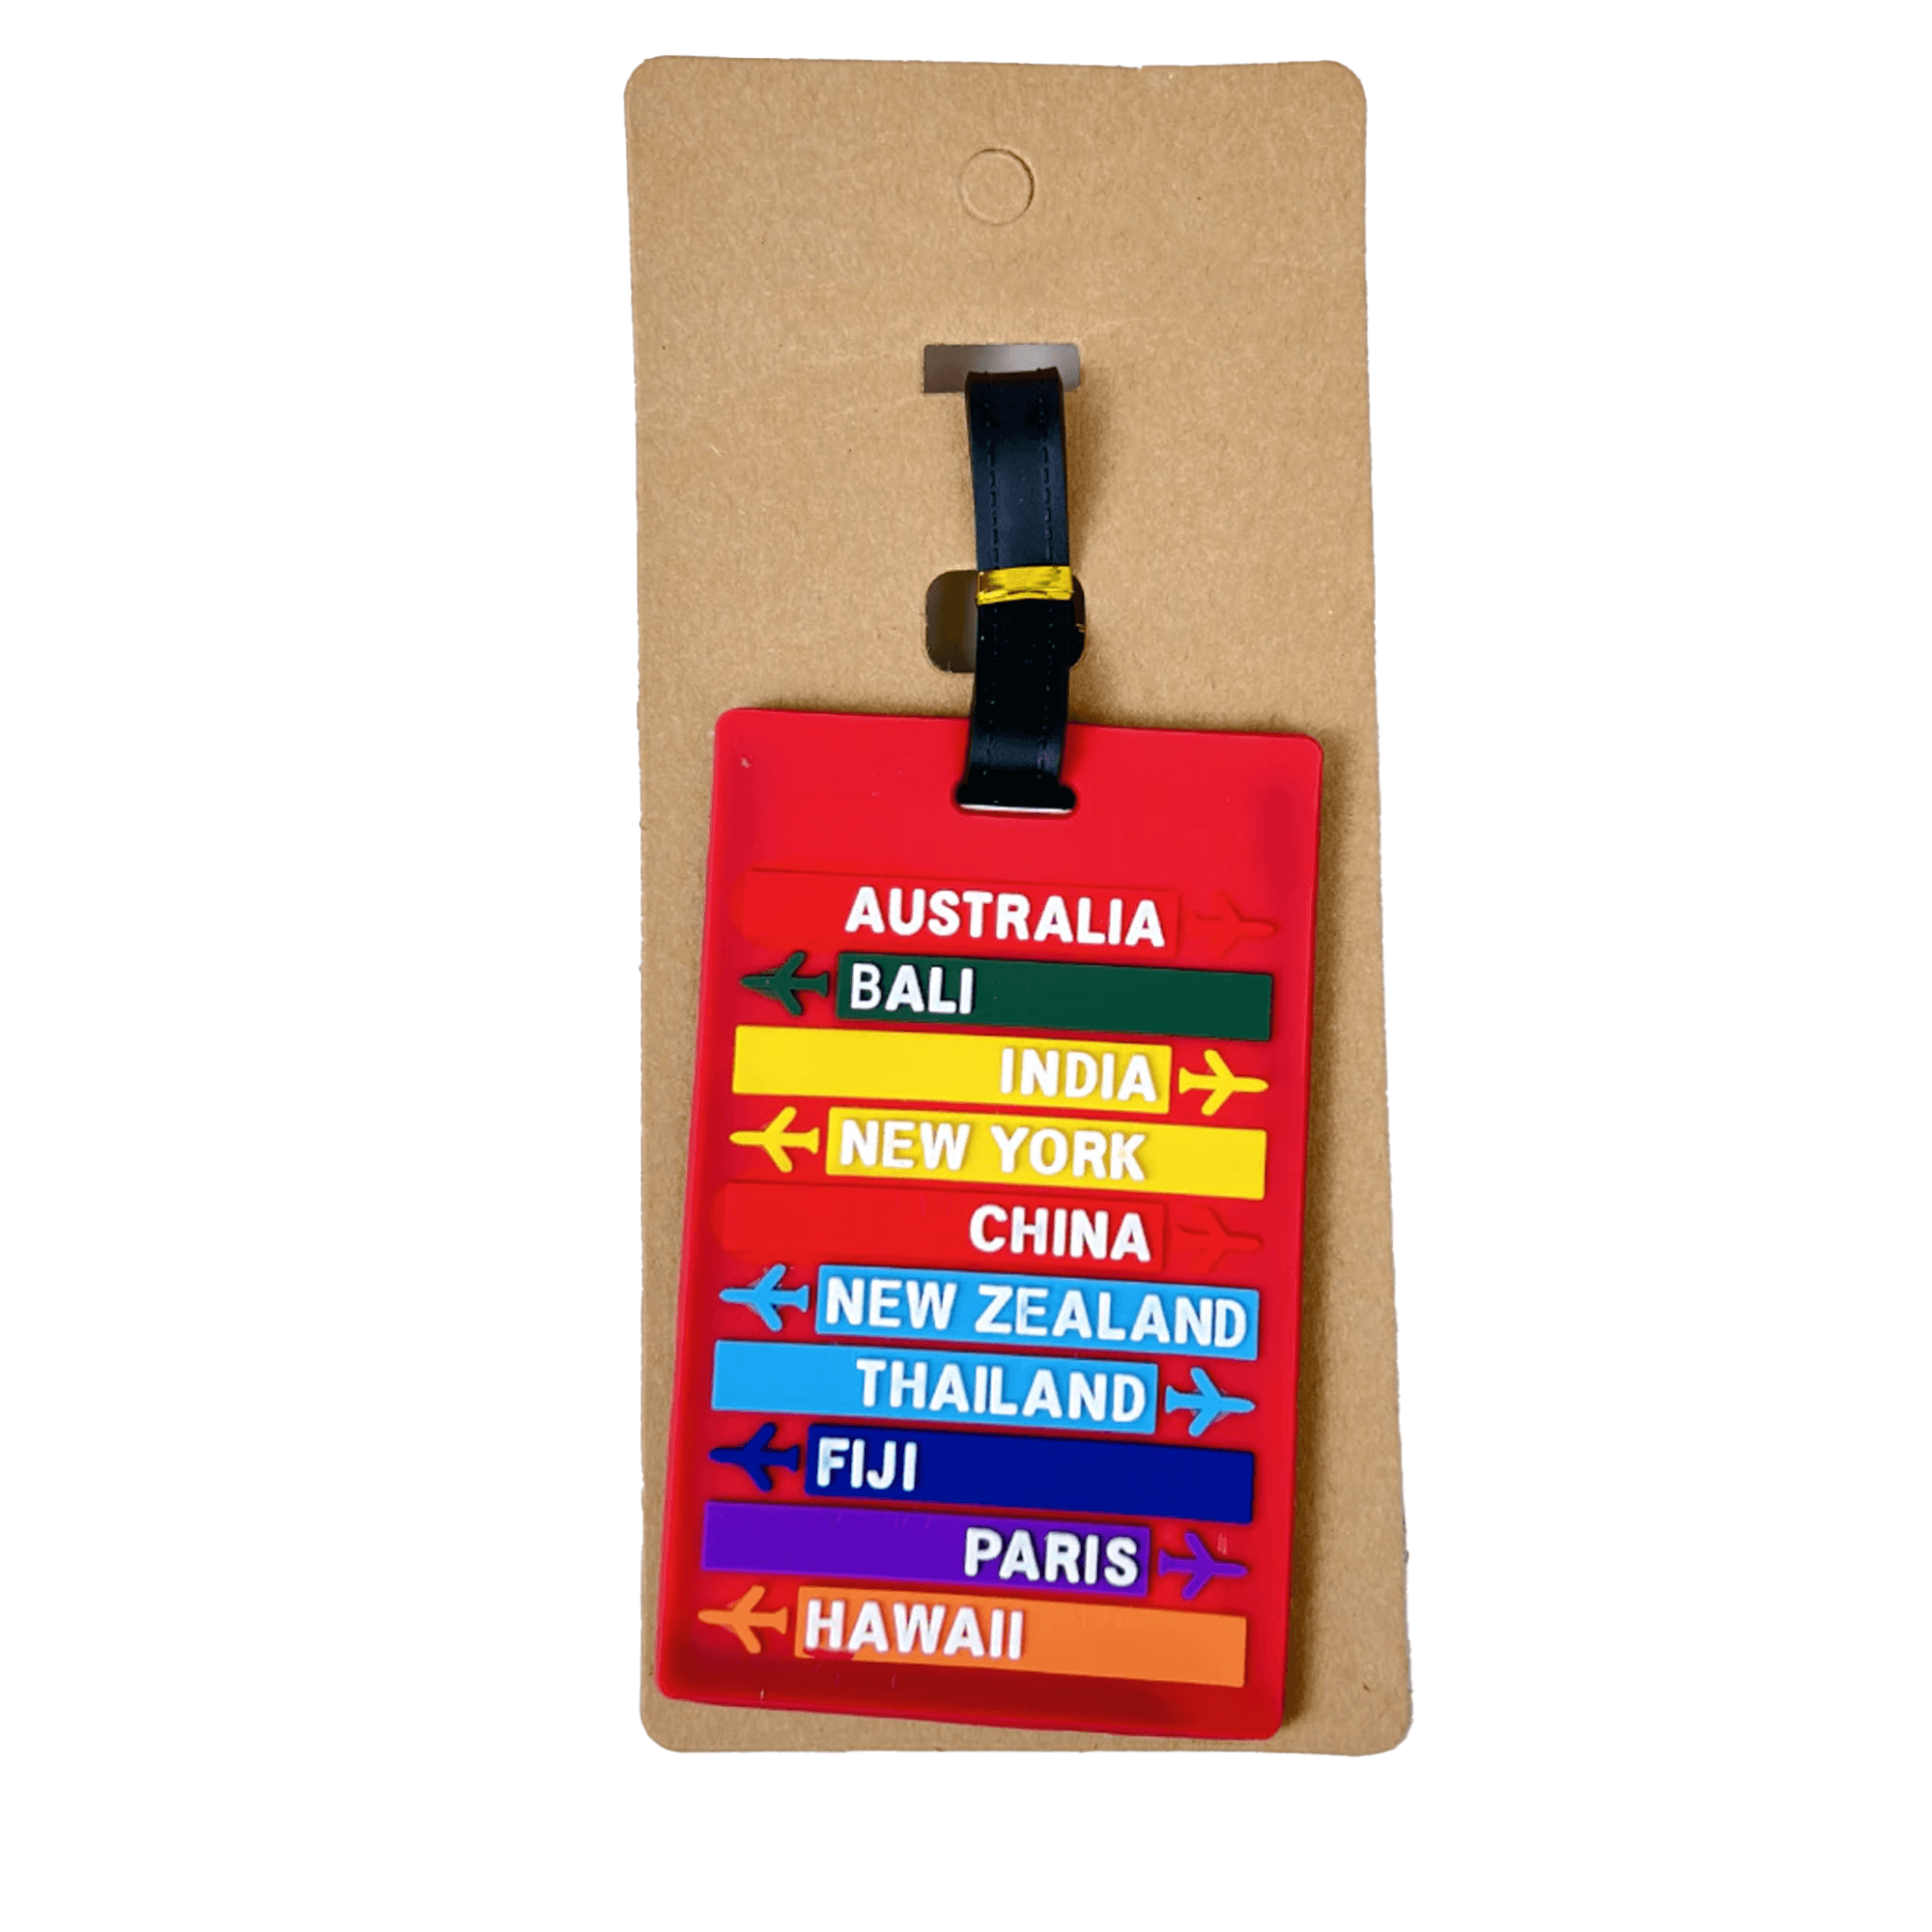 Luggage Travel Tag - San Michelle Bags suitcase nz